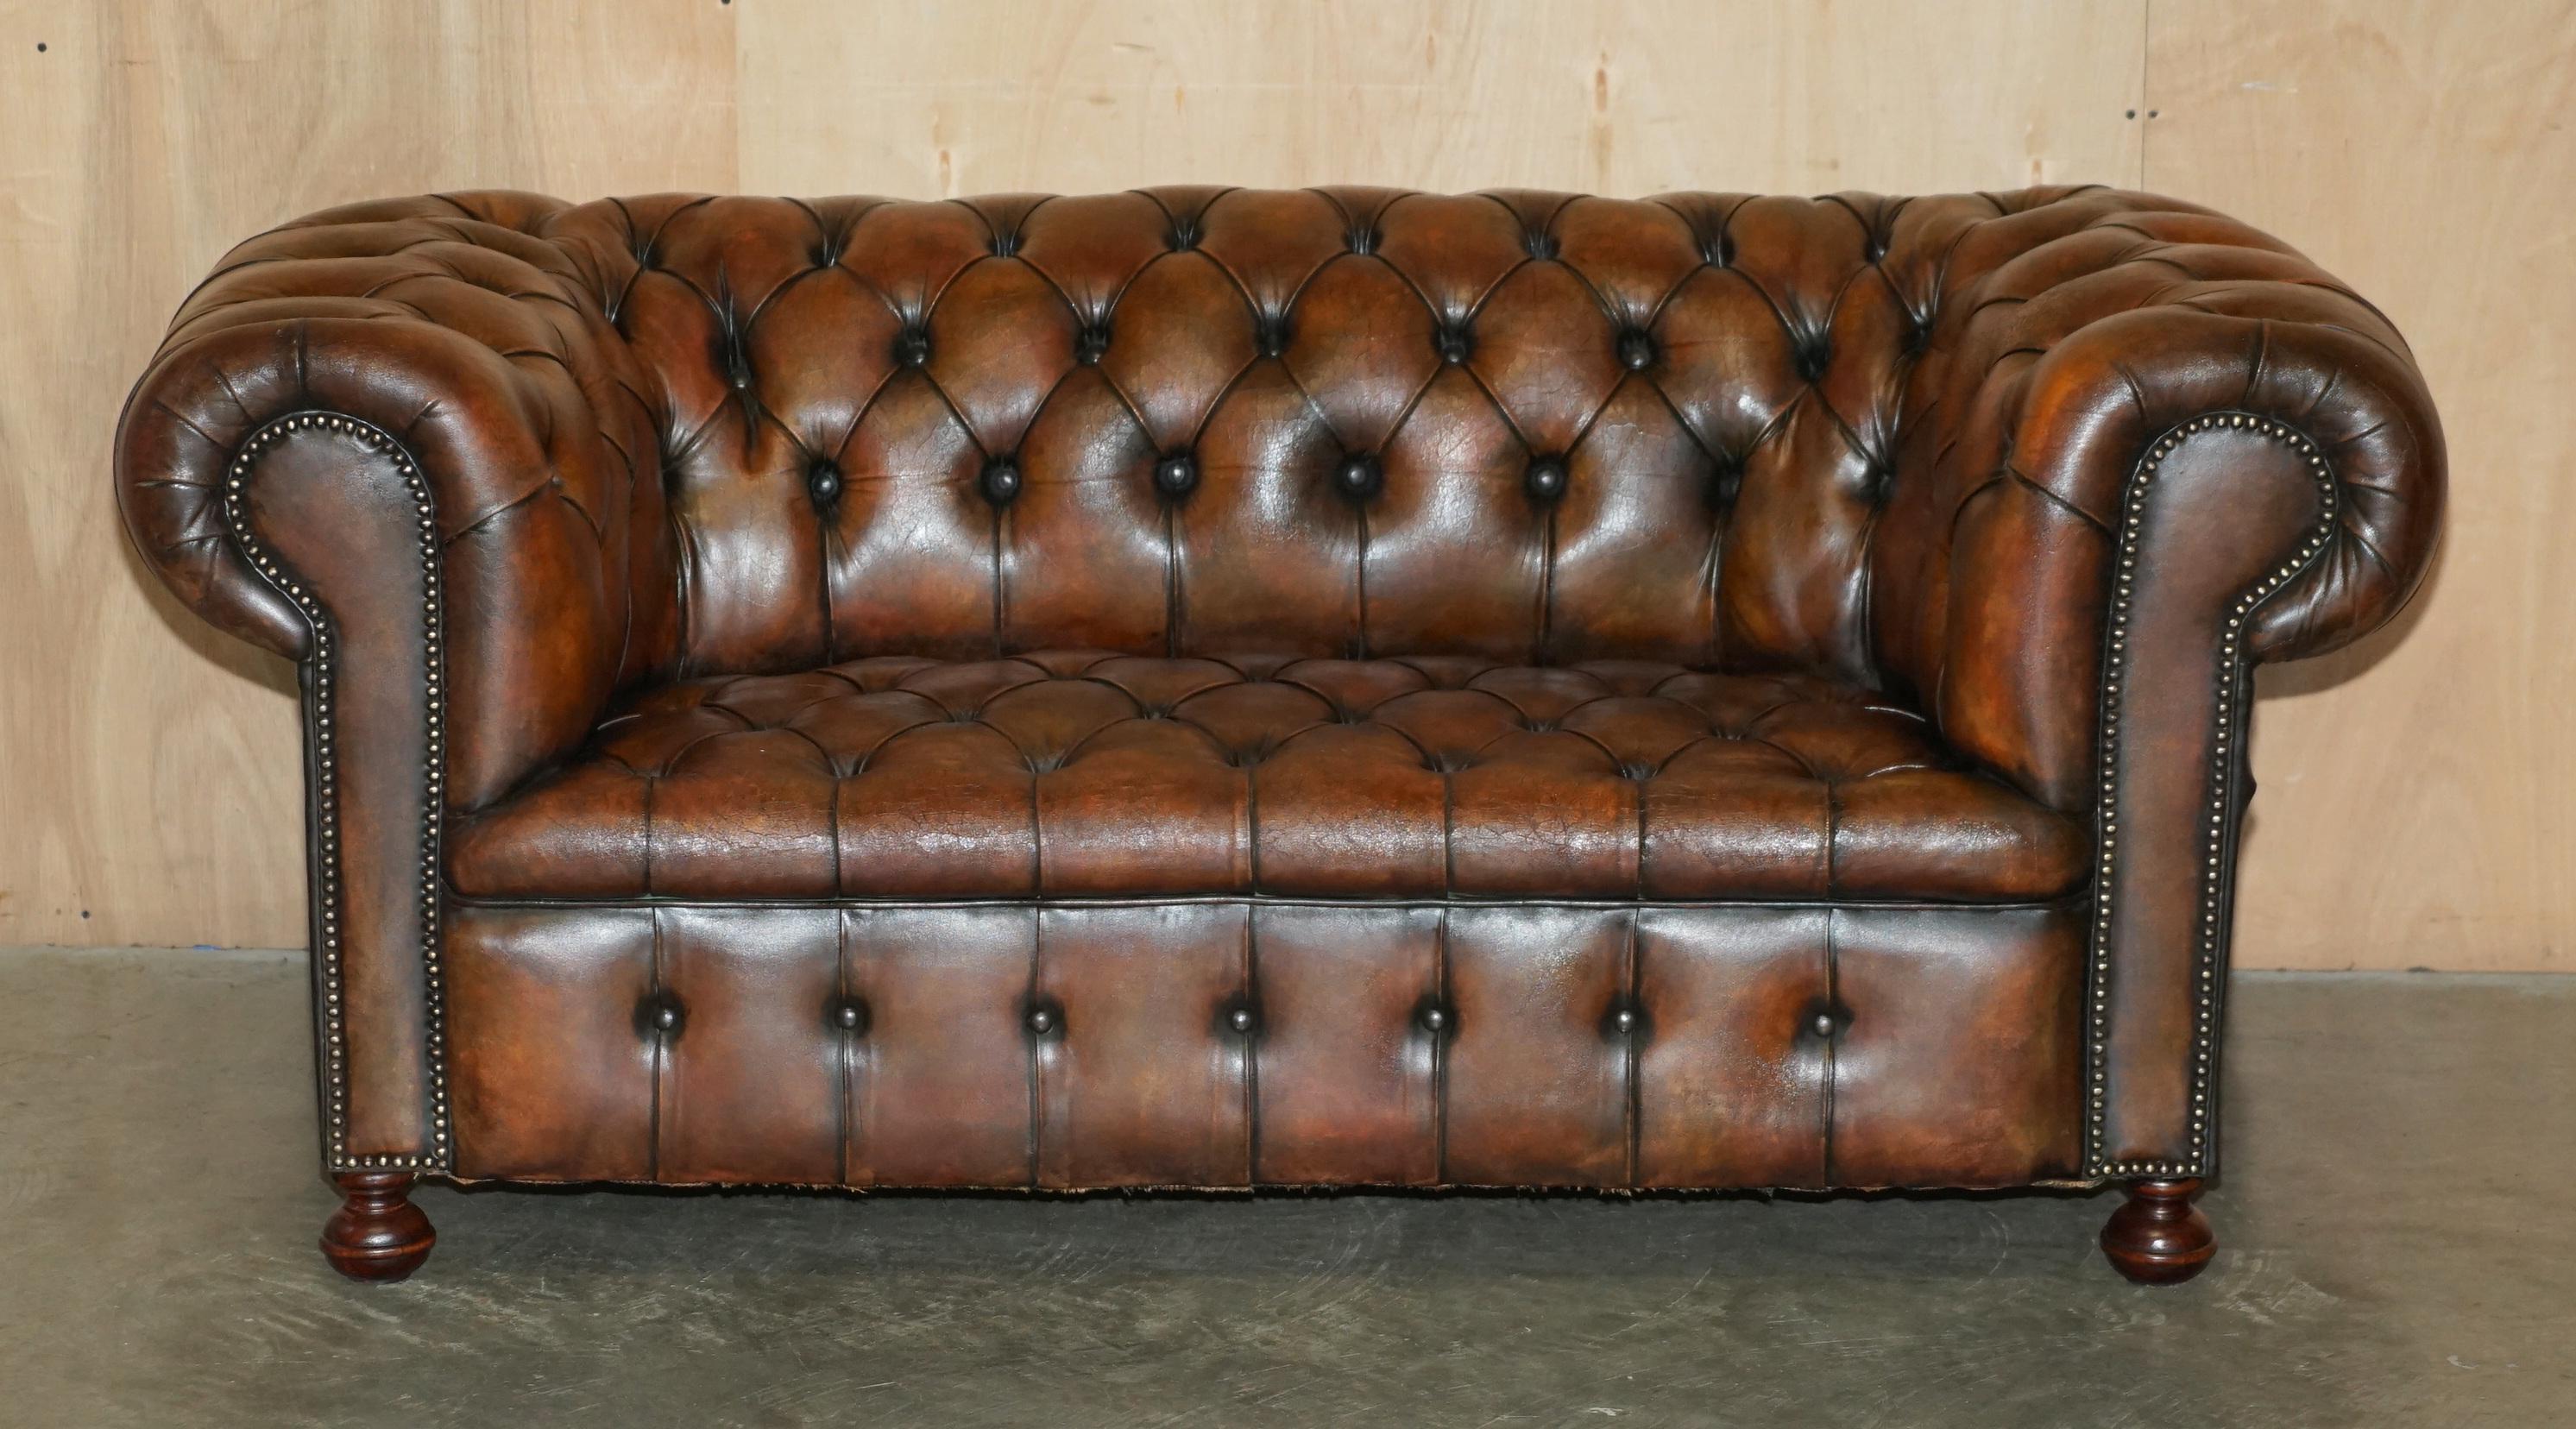 Royal House Antiques

Royal House Antiques is delighted to offer for sale this lovely rare original fully restored Victorian 1890-1900 cigar brown leather Chesterfield sofa

Please note the delivery fee listed is just a guide, it covers within the